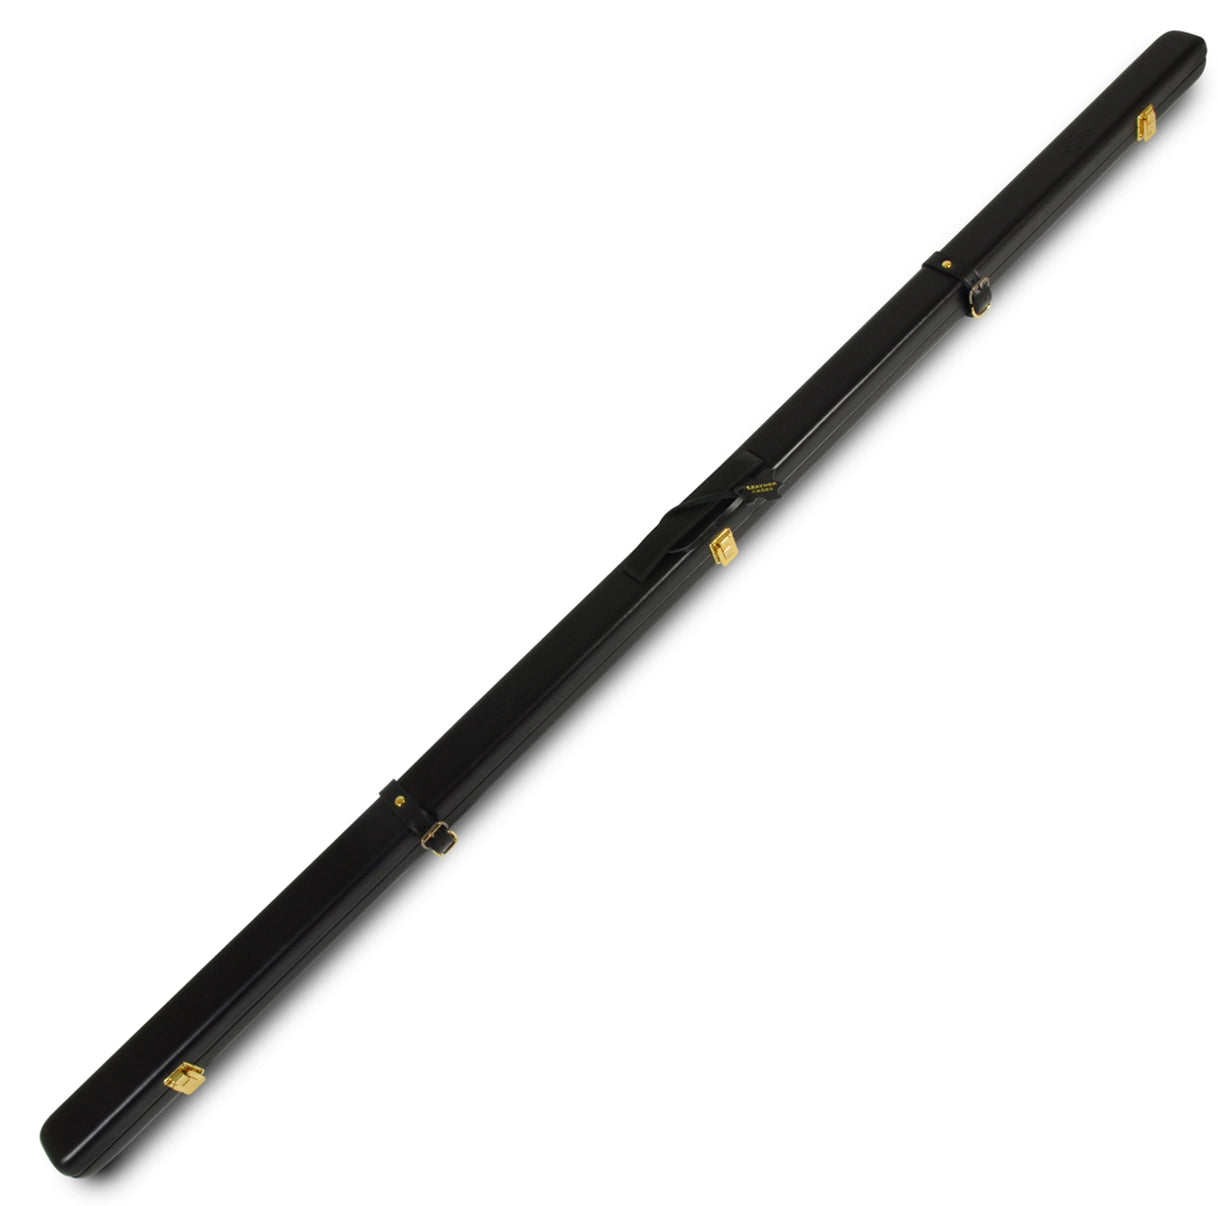 Peradon Thin Leather One Piece Cue Case Black. On angle view